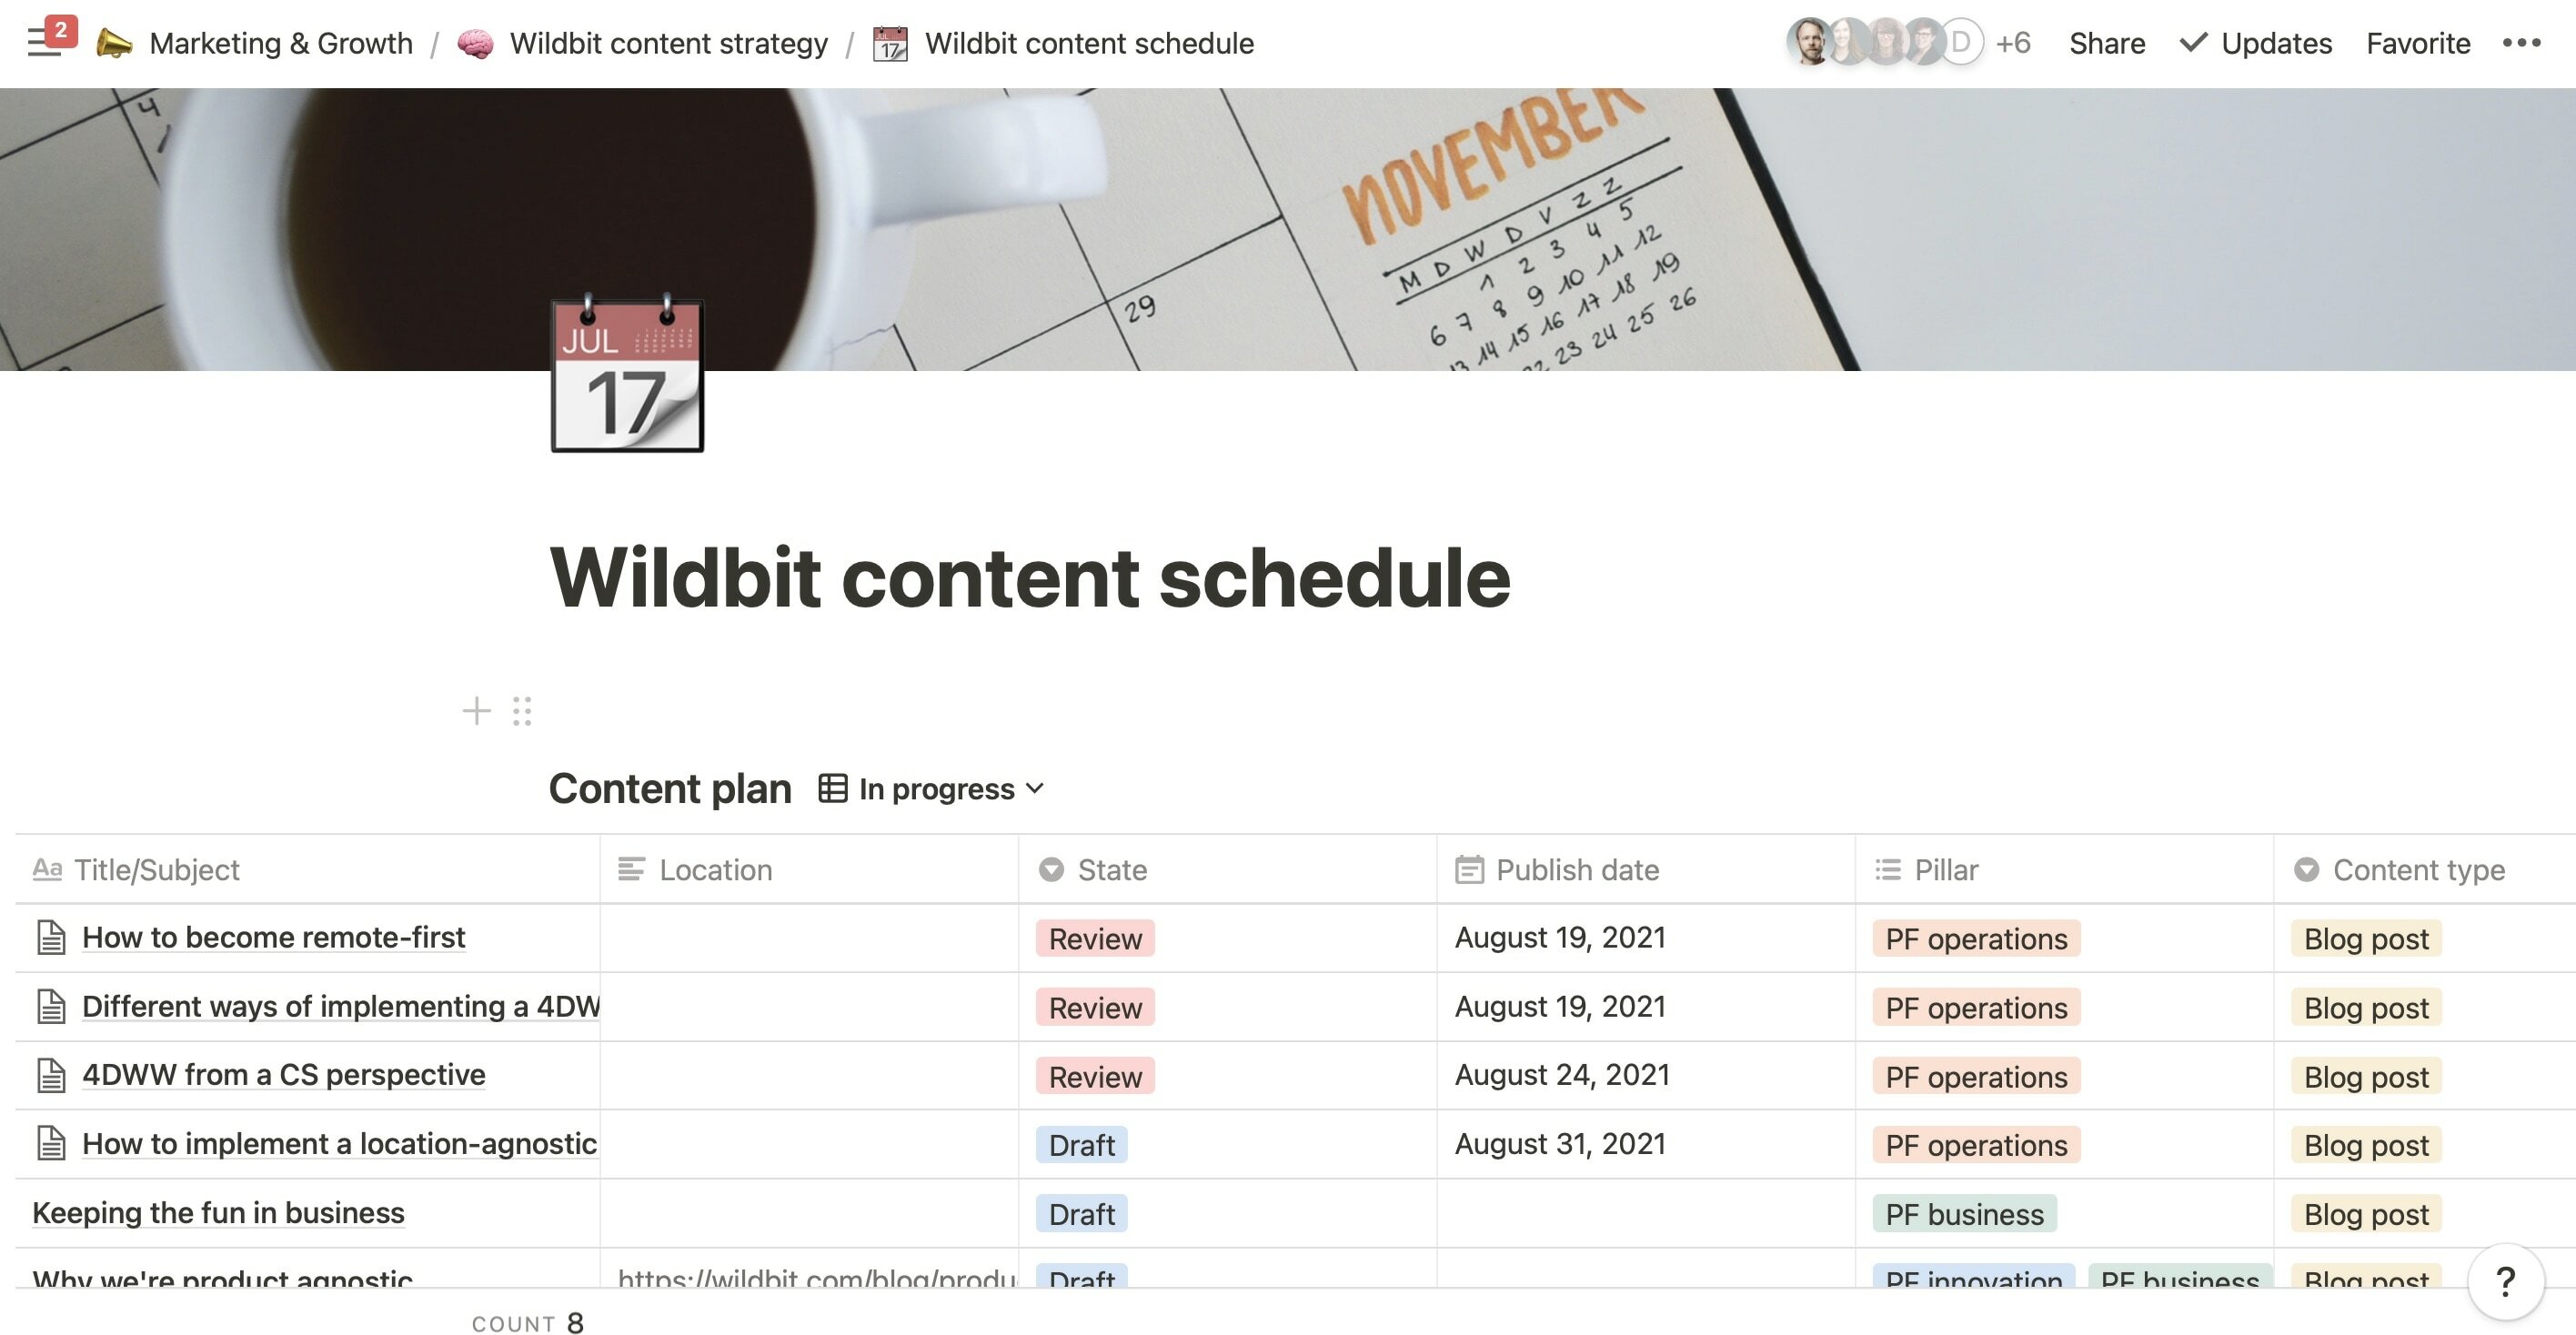 The content calendar the Wildbit team uses in Notion.